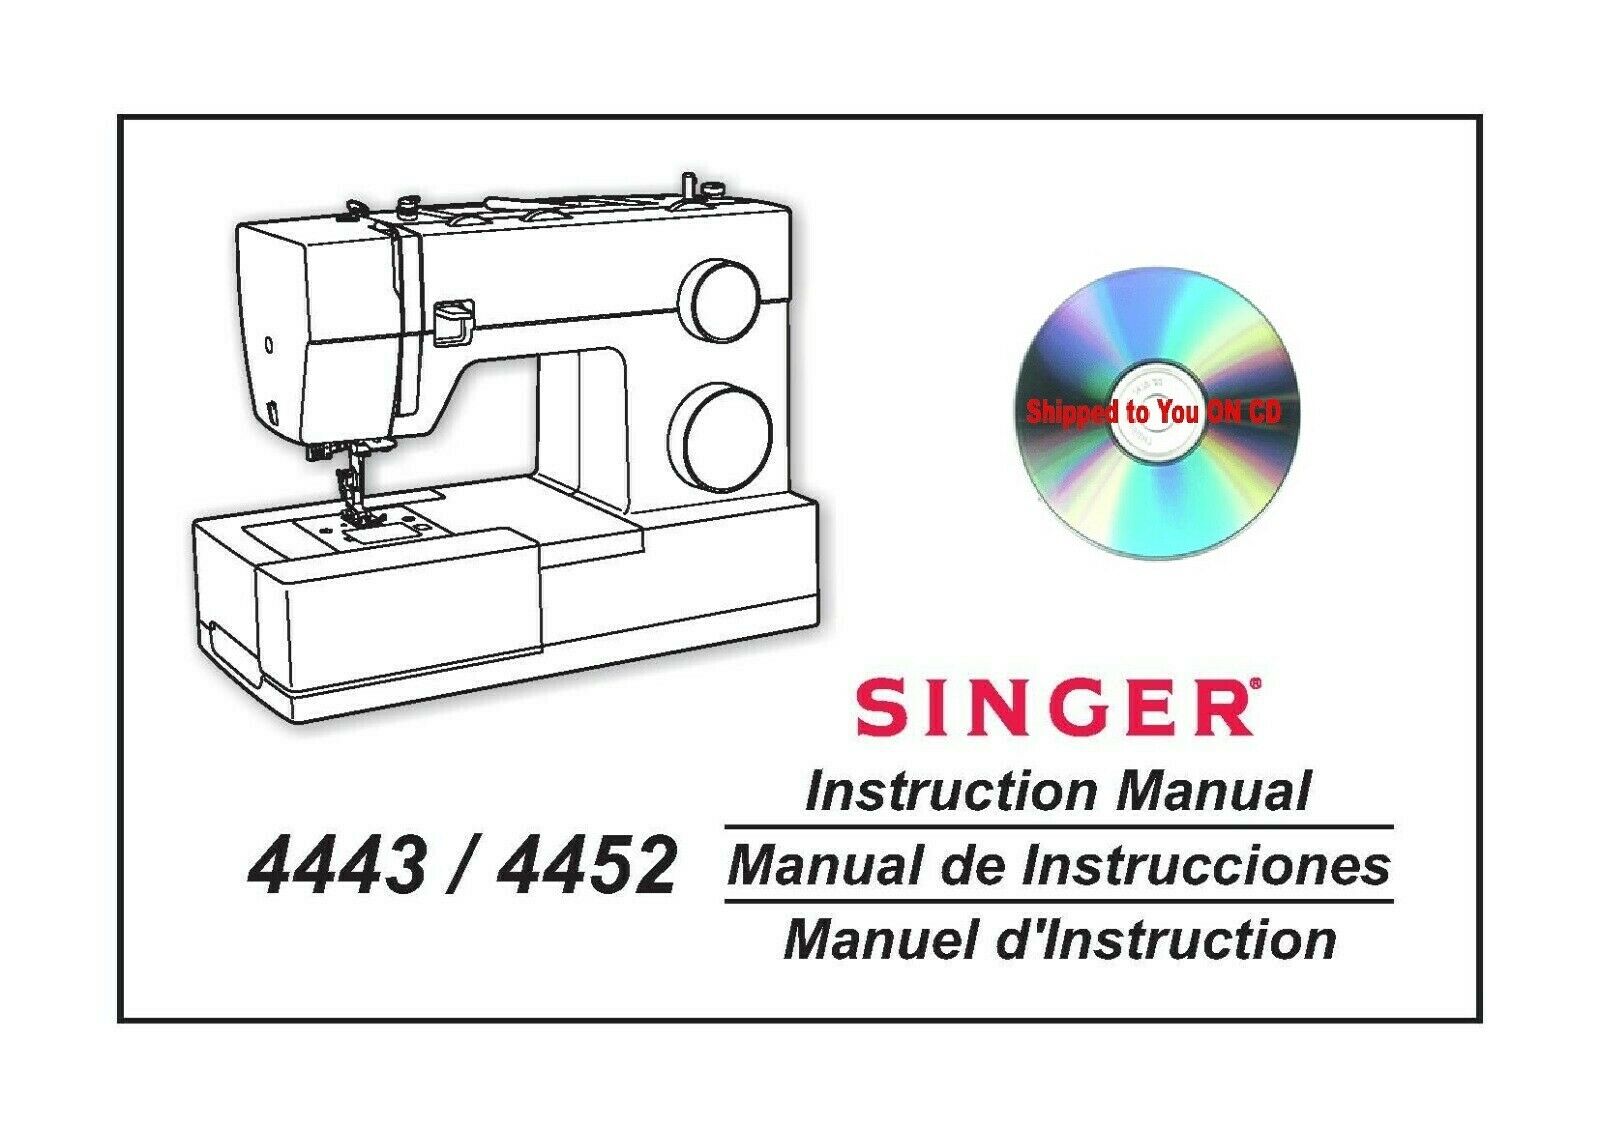 Singer 4443-4452 Sewing Machine/embroidery/serger Owners Manual + 2 Bonuses